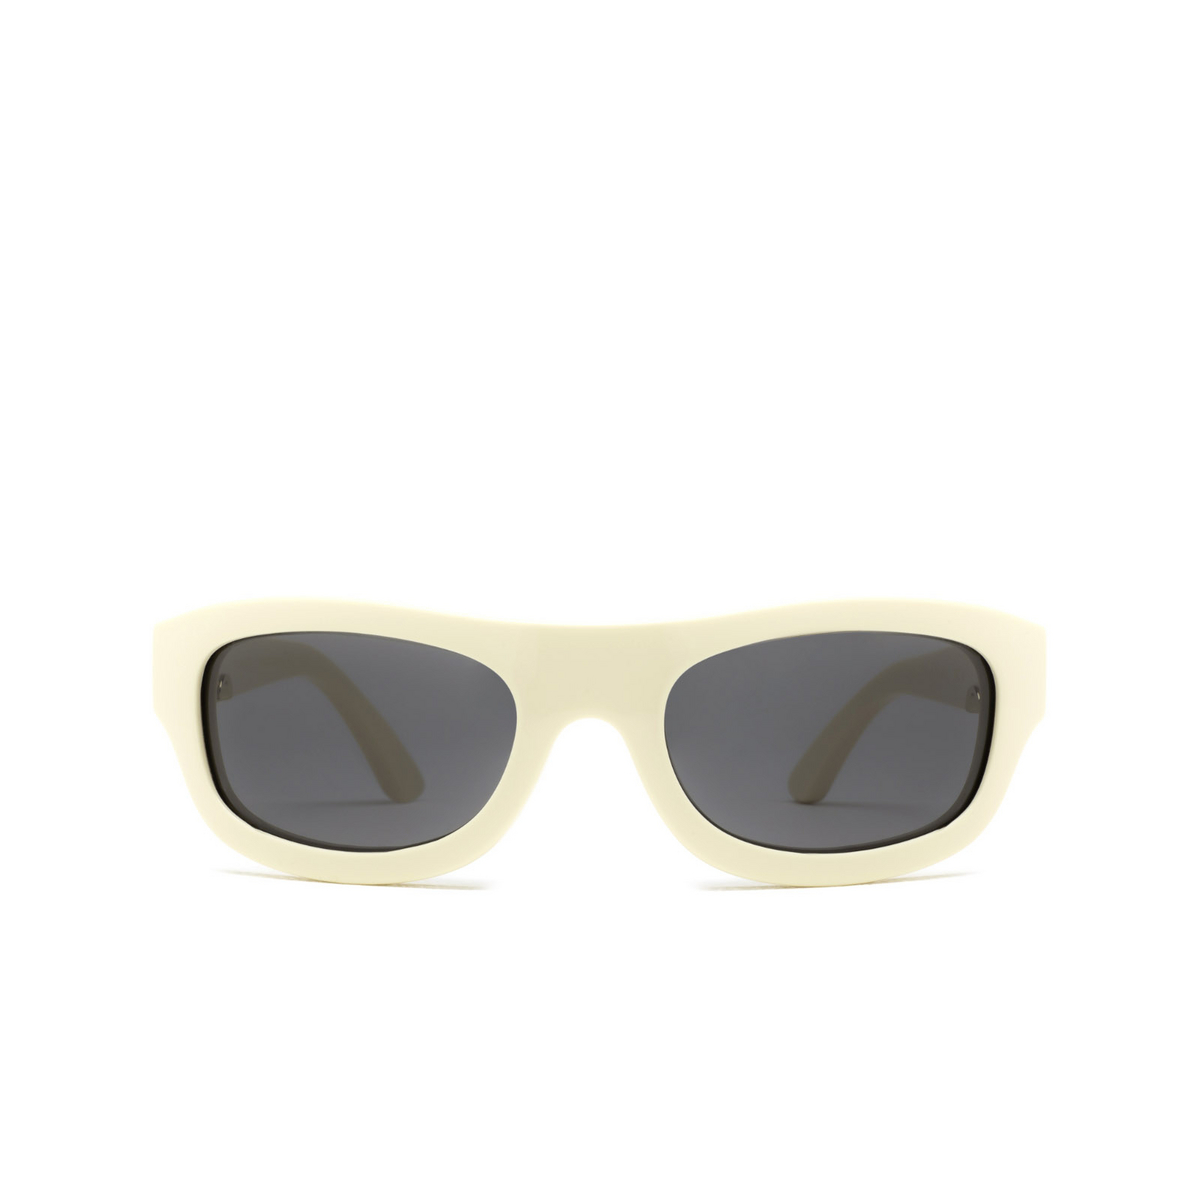 Huma® Rectangle Sunglasses: Ali color Ivory 07 - front view.